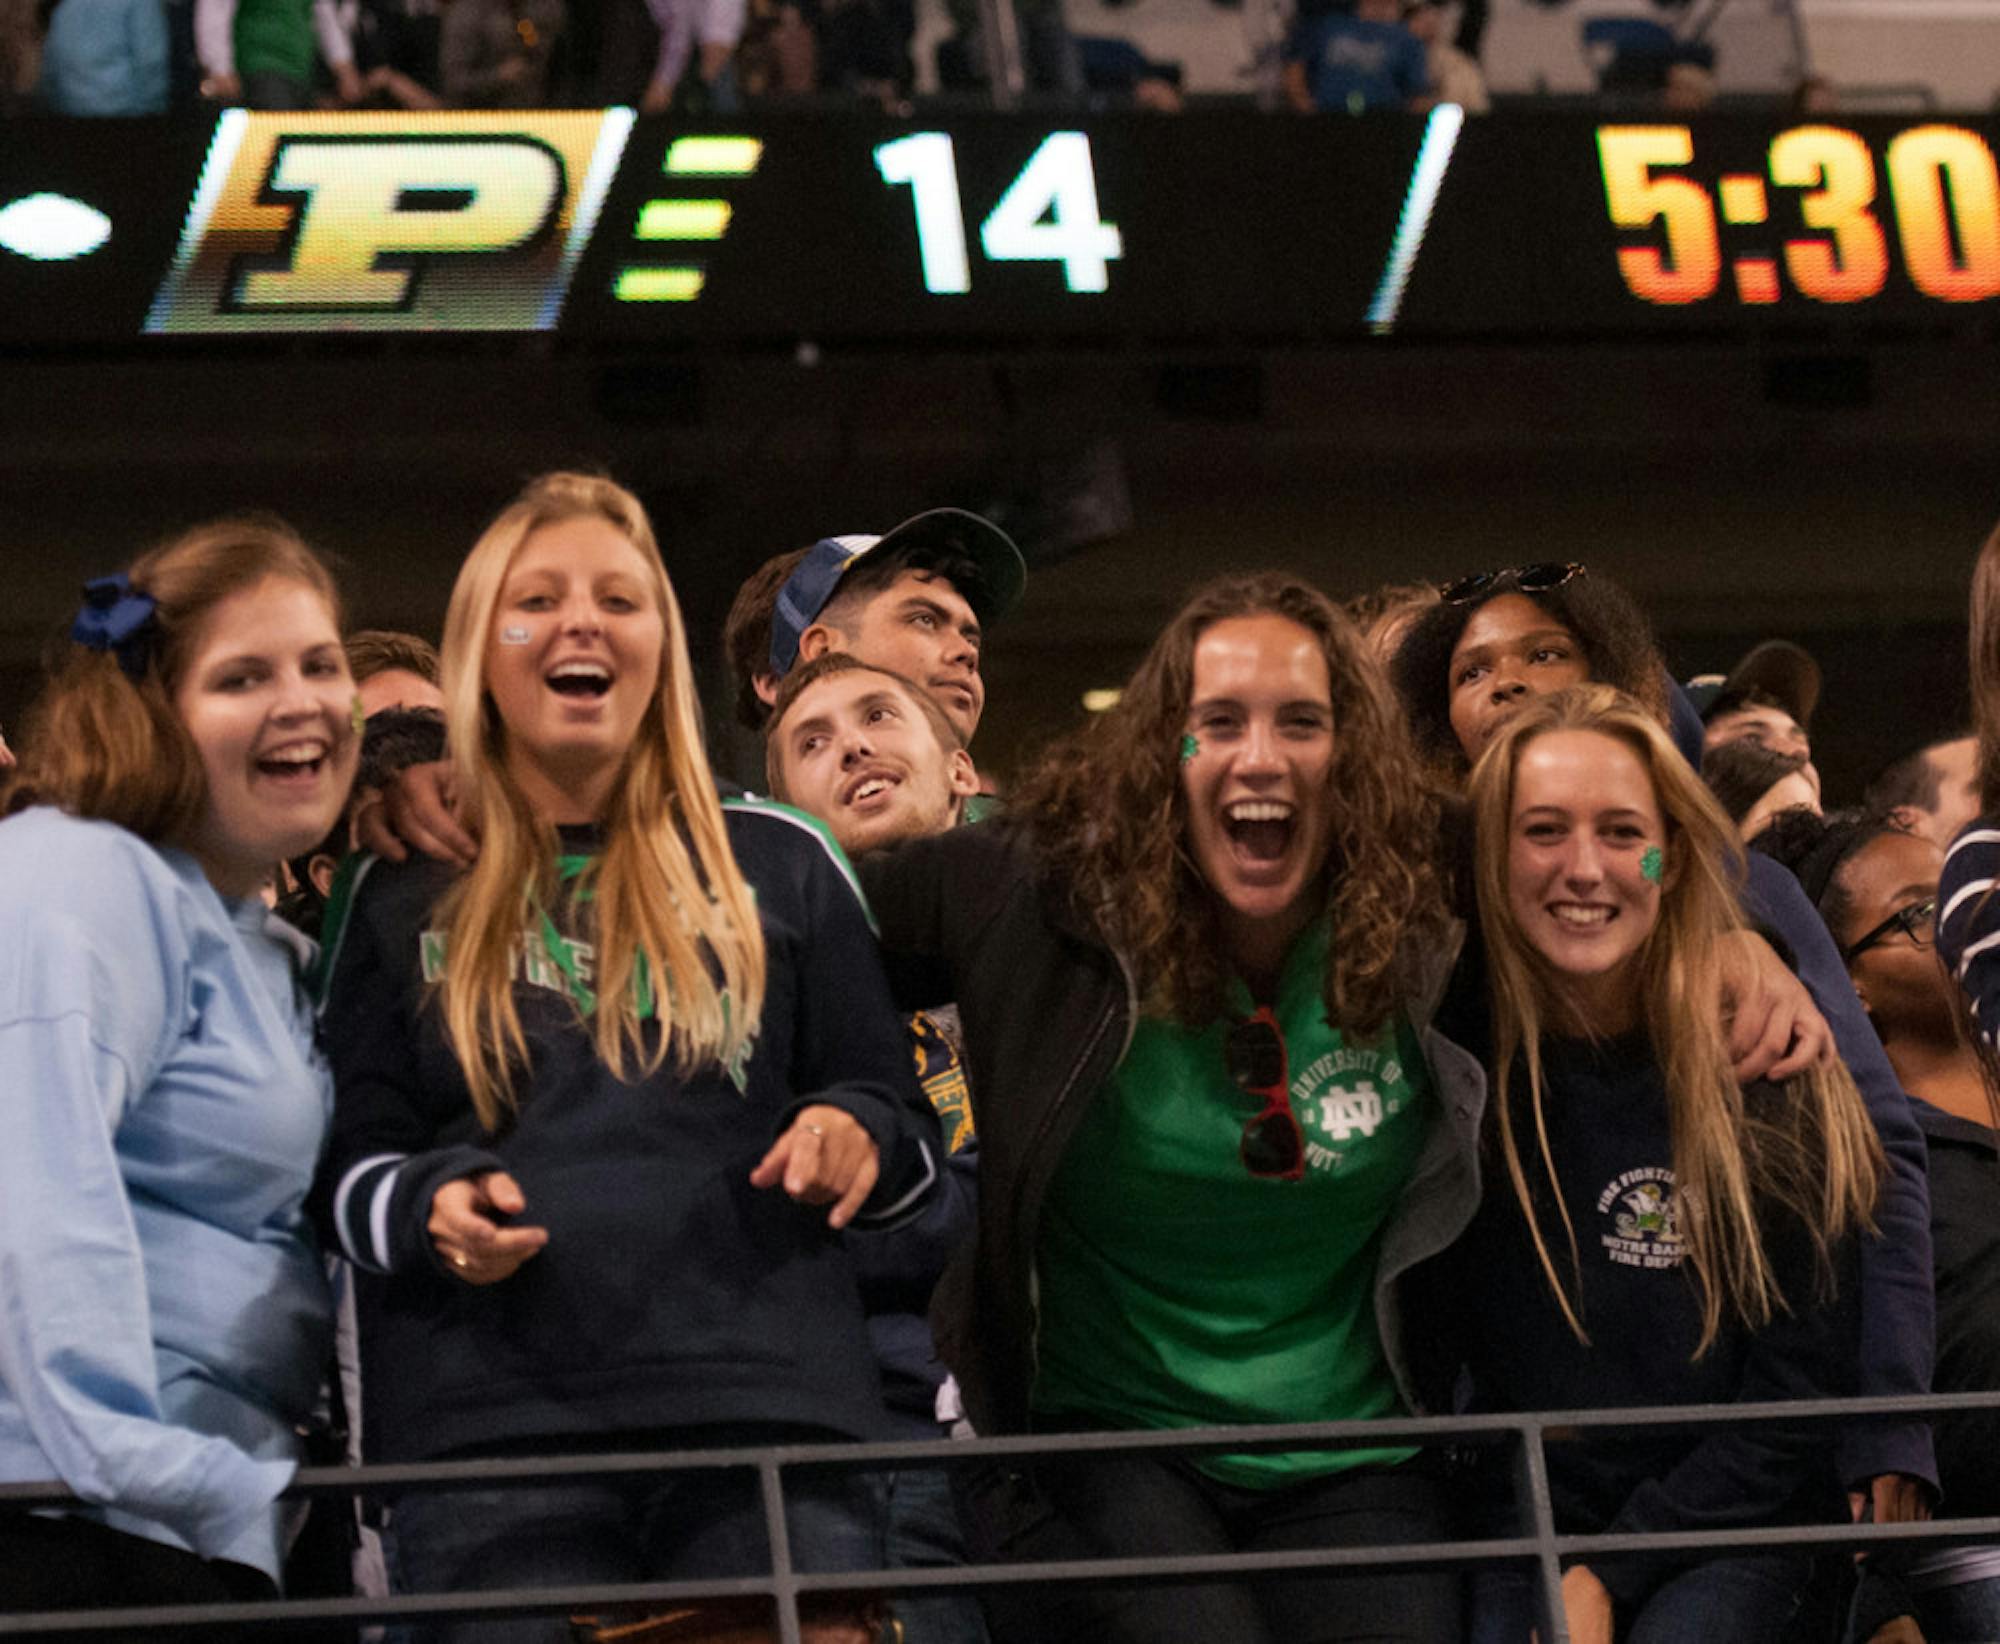 A group of students cheer on the Irish against Purdue in the Shamrock series in Lucas Oil Stadium on Sept. 13, 2014.